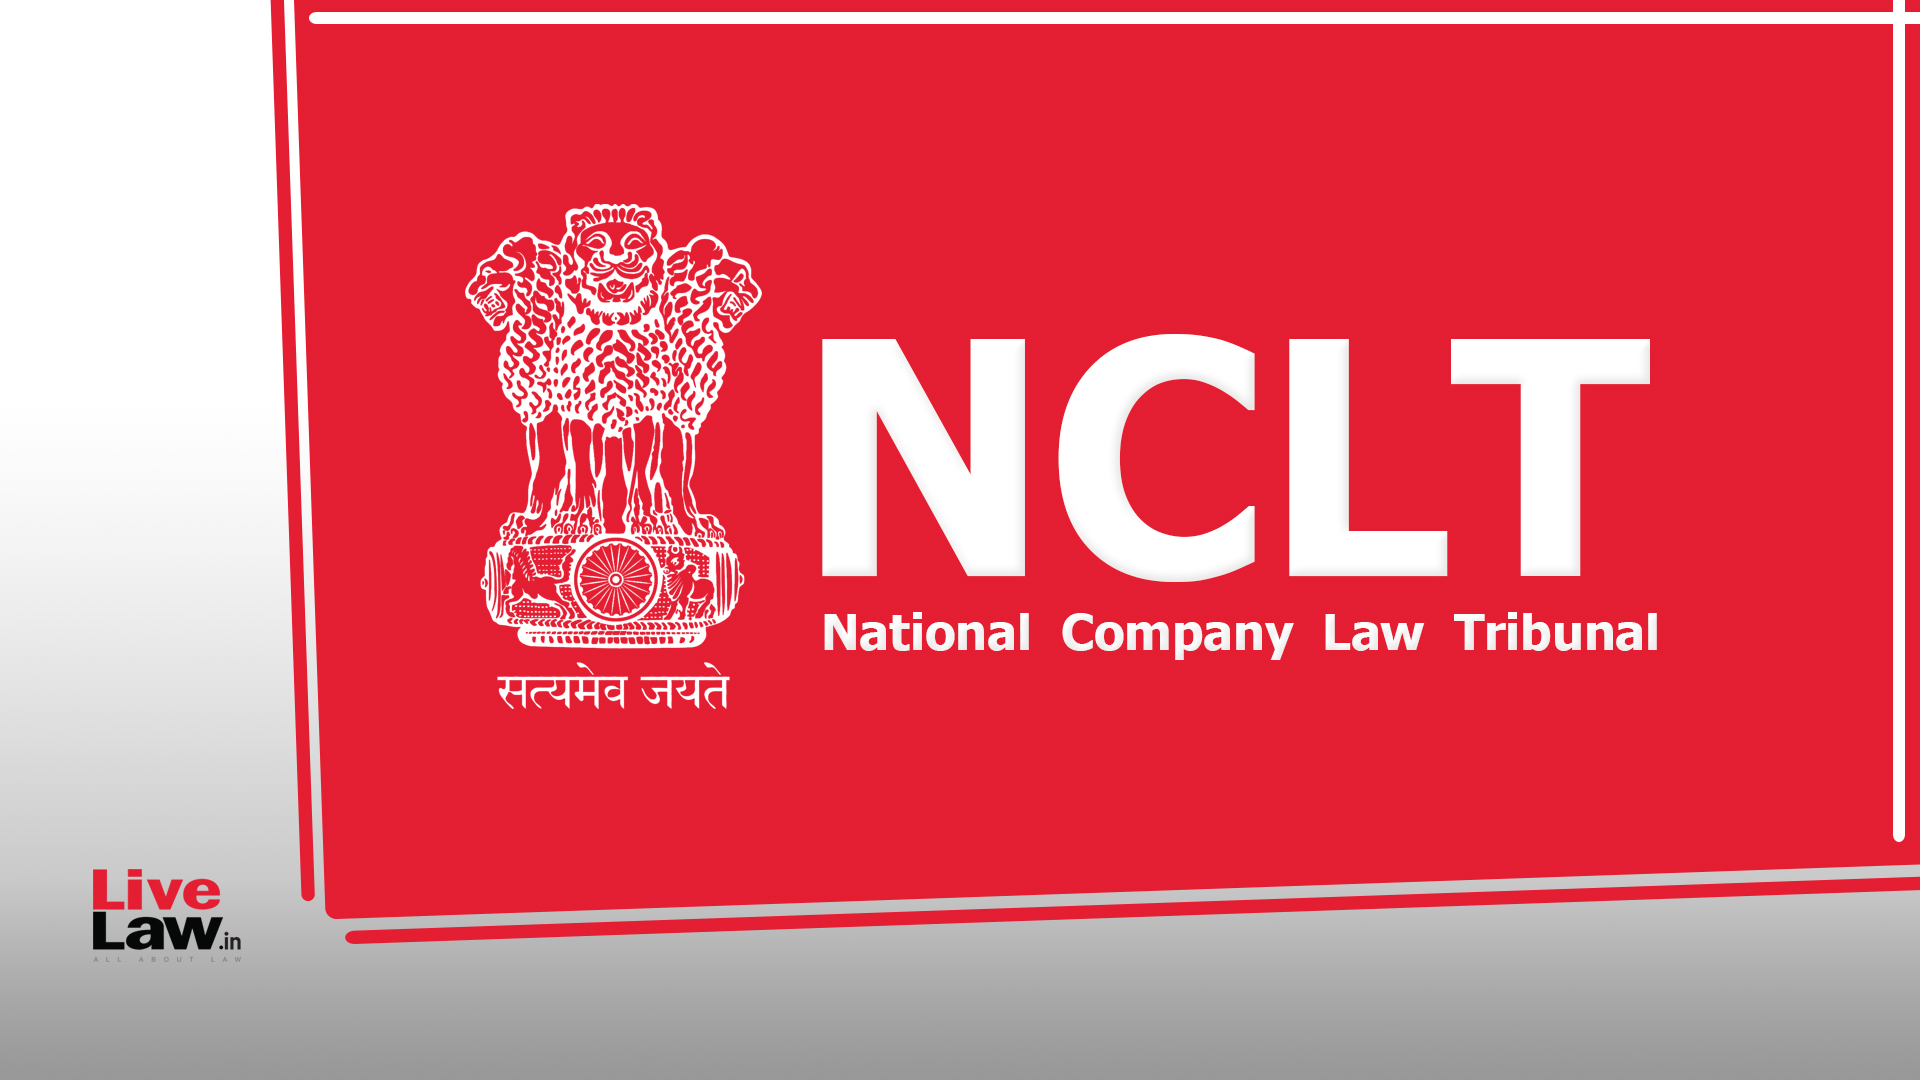 Minimum Threshold Of Rs. 1 Crore Must Be Met, Even If Default Had Occurred Or Demand Notice Was Sent Prior To 24th March, 2020: NCLT Delhi